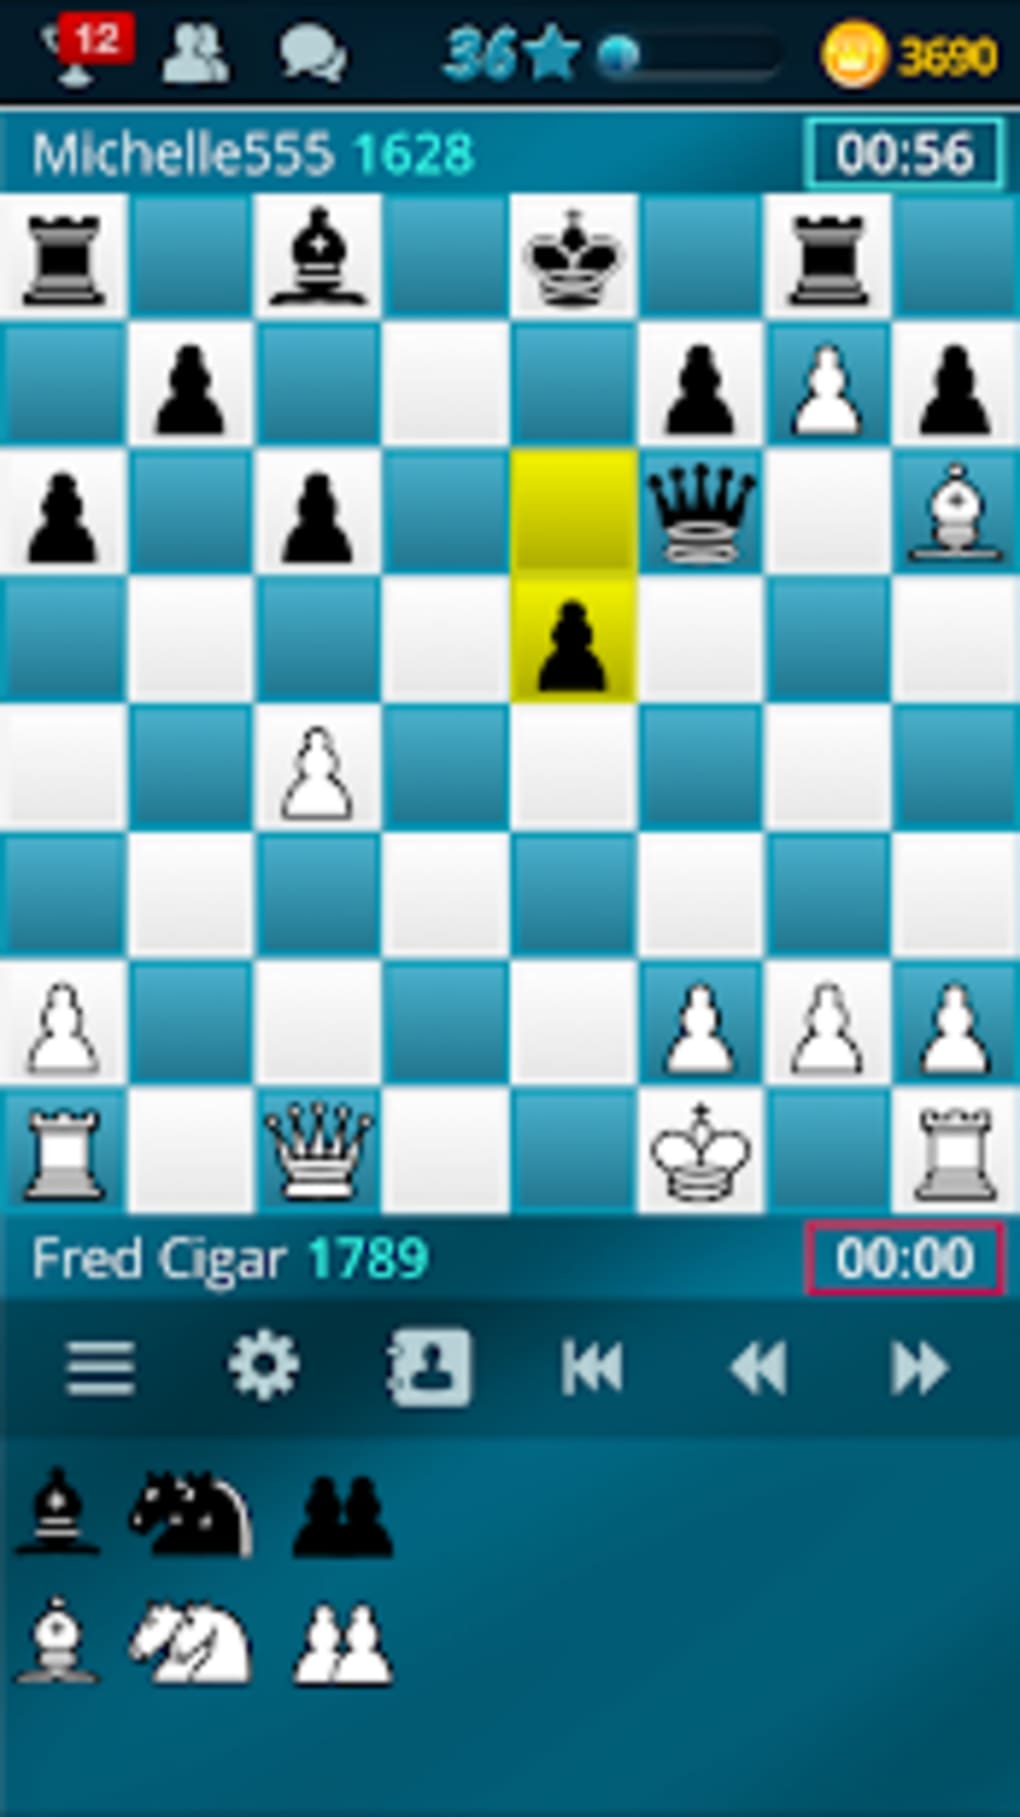 Chess Online Apk Download for Android- Latest version 5.6.7